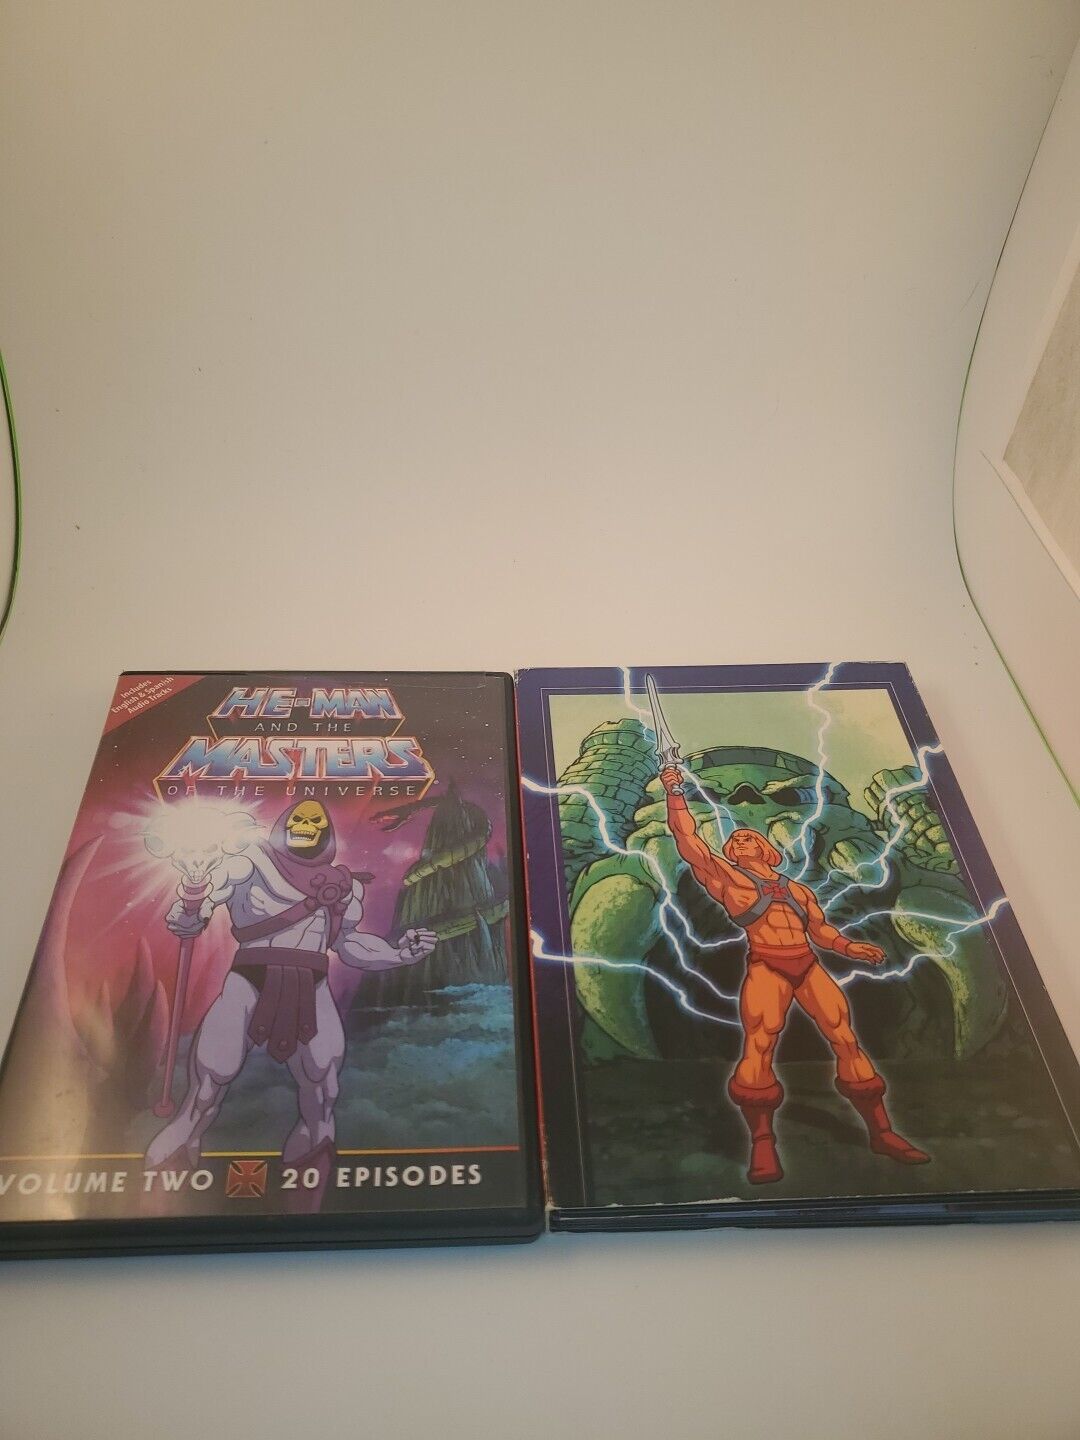 HE MAN and the MASTERS of the UNIVERSE DVD Box Sets 10 Best AND Volume 2